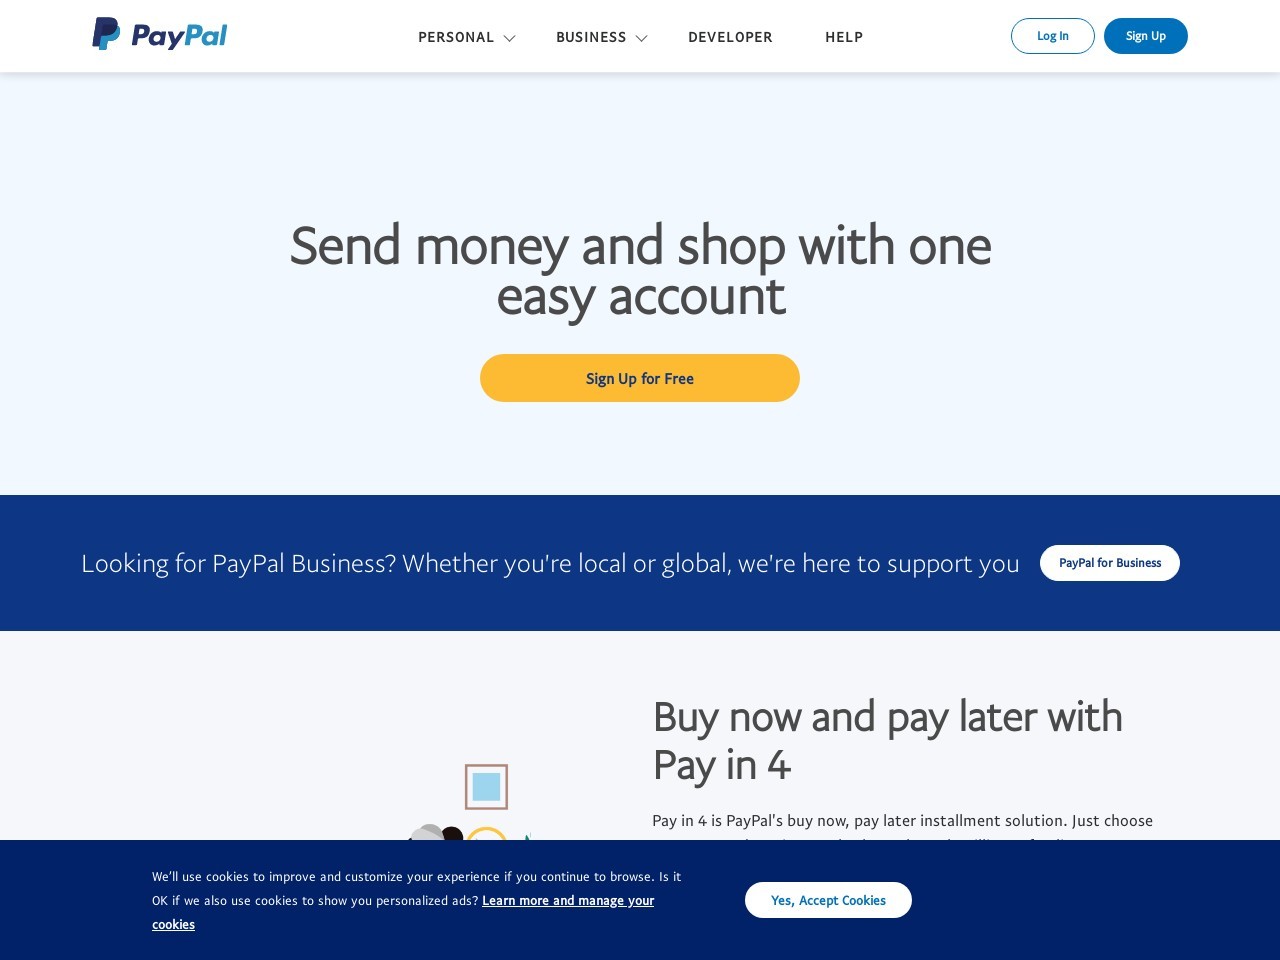 How do I confirm my email address? - PayPal